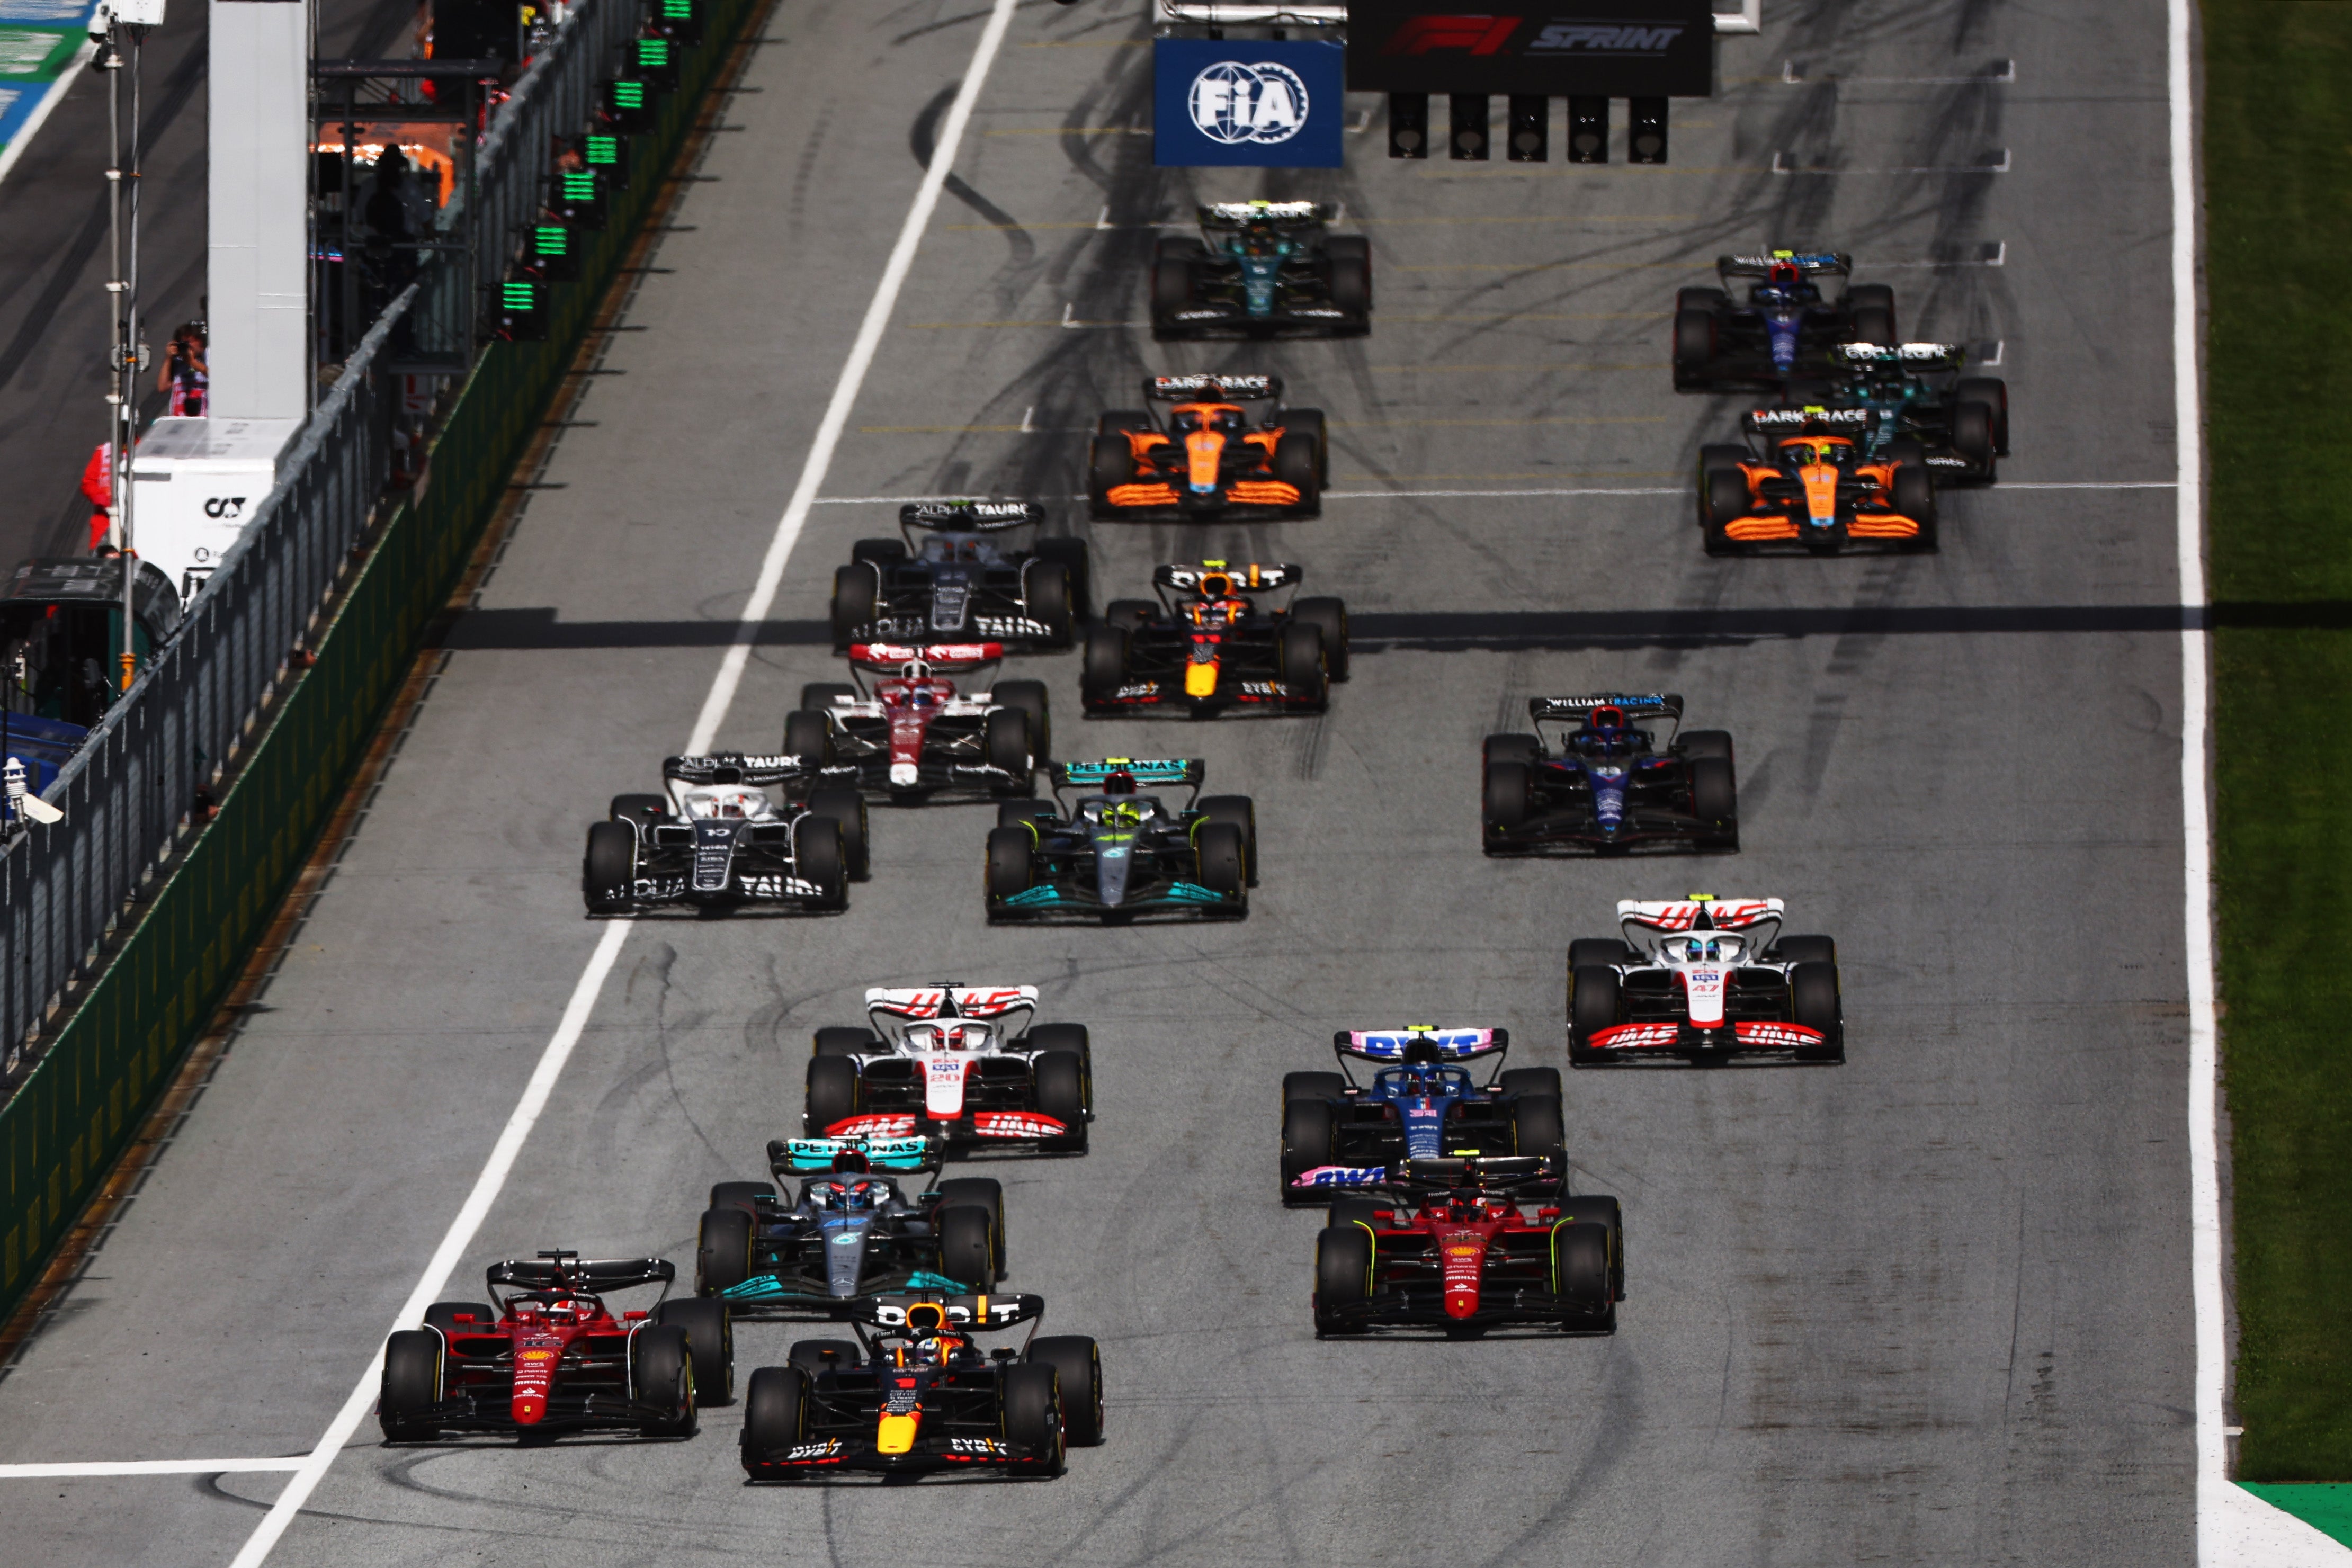 F1 sprint shootout format approved by teams for Azerbaijan Grand Prix